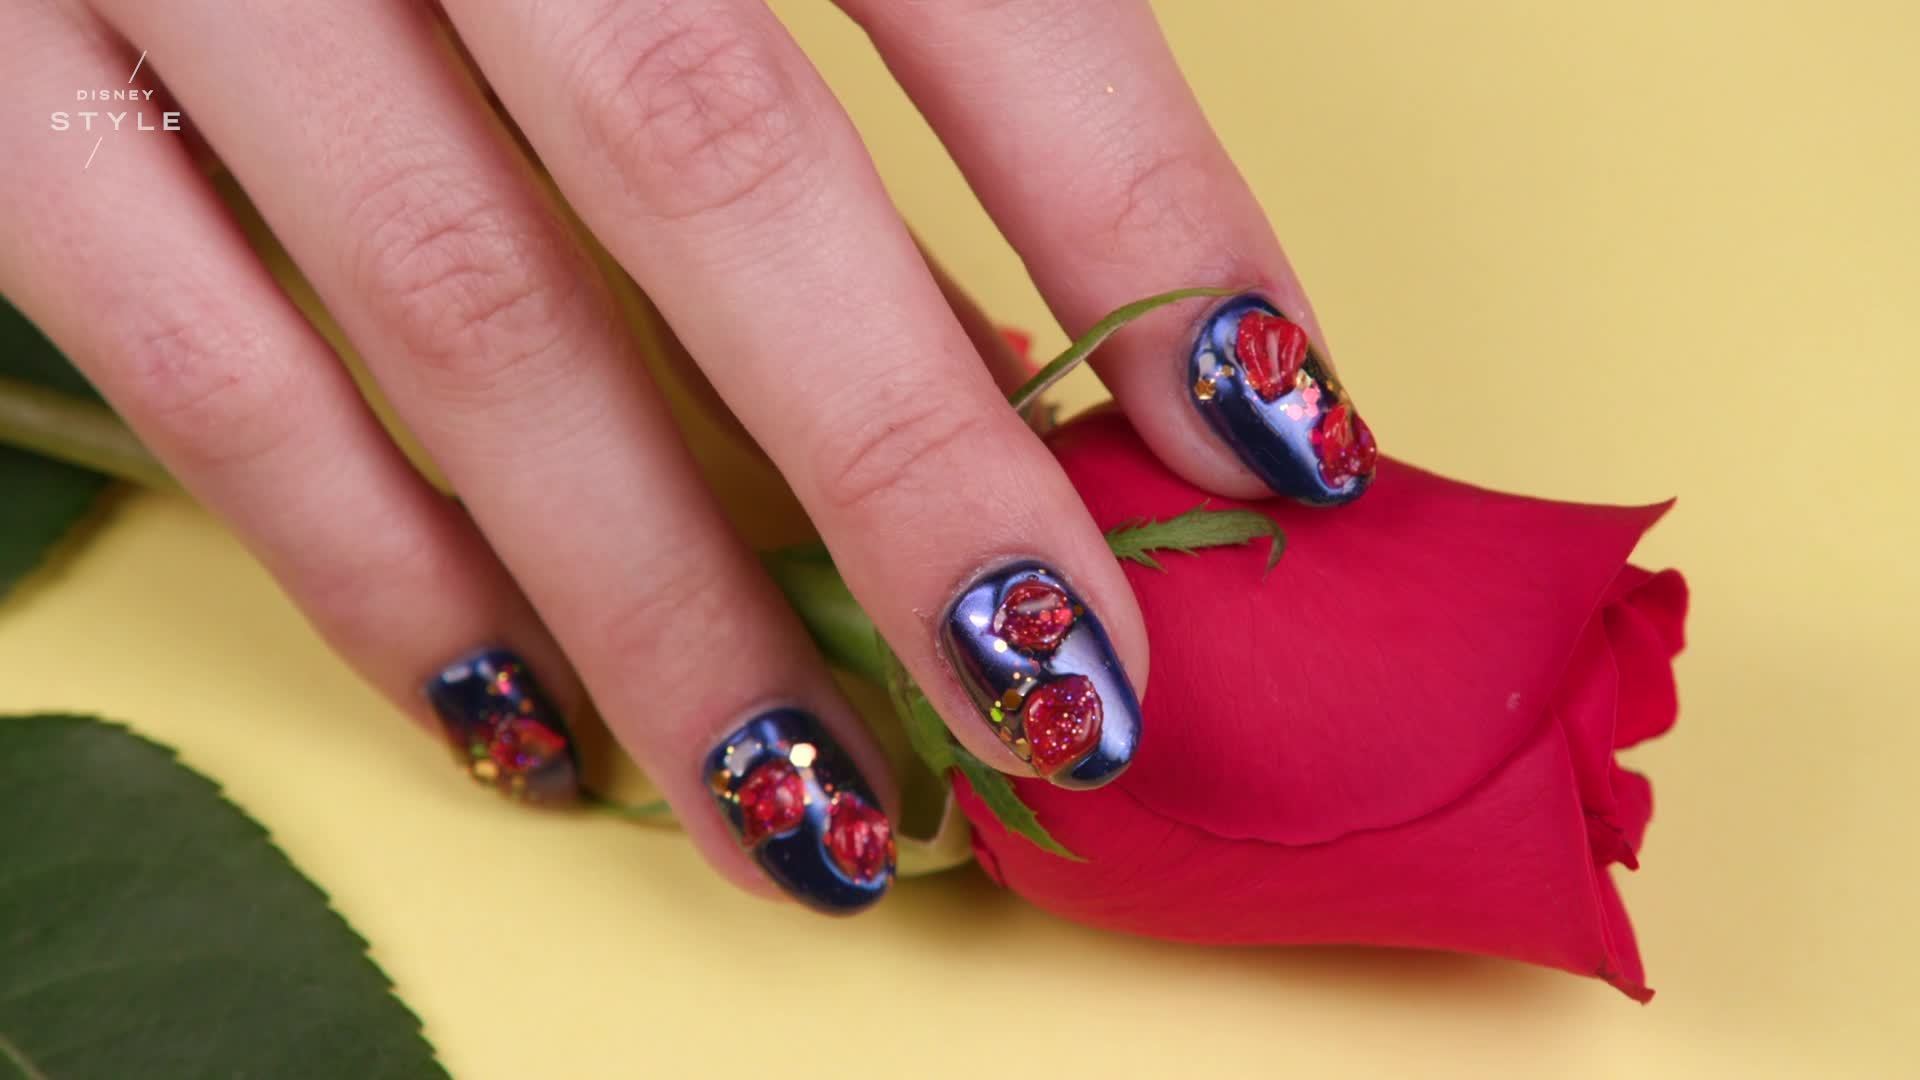 Beauty and the Beast 3D Deco Nail Art | TIPS by Disney Style